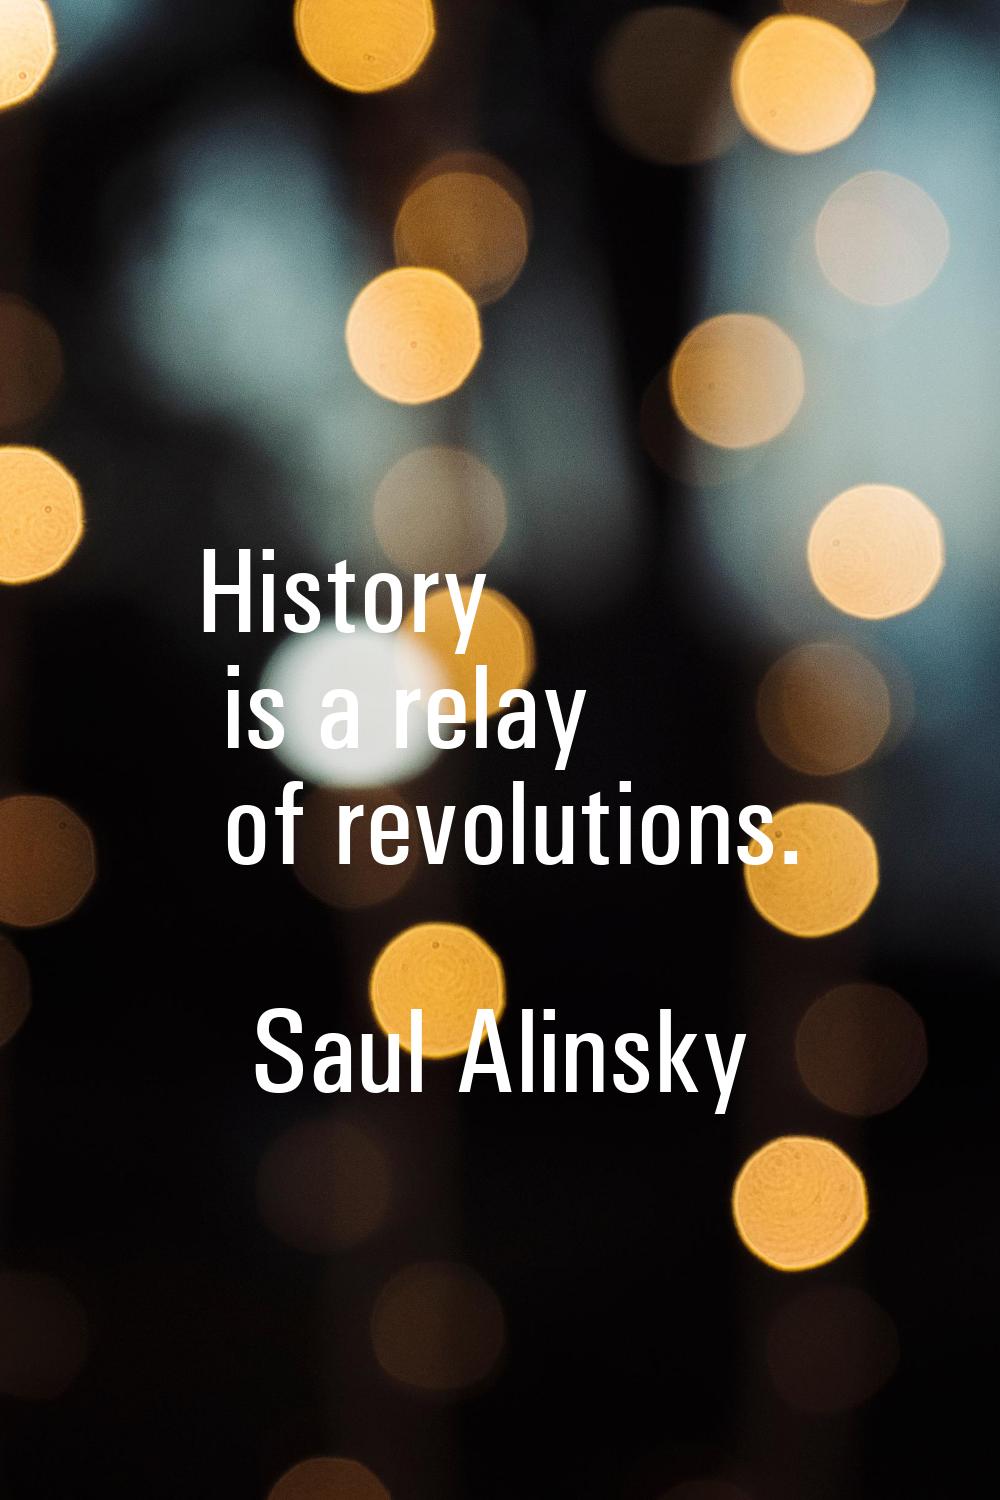 History is a relay of revolutions.